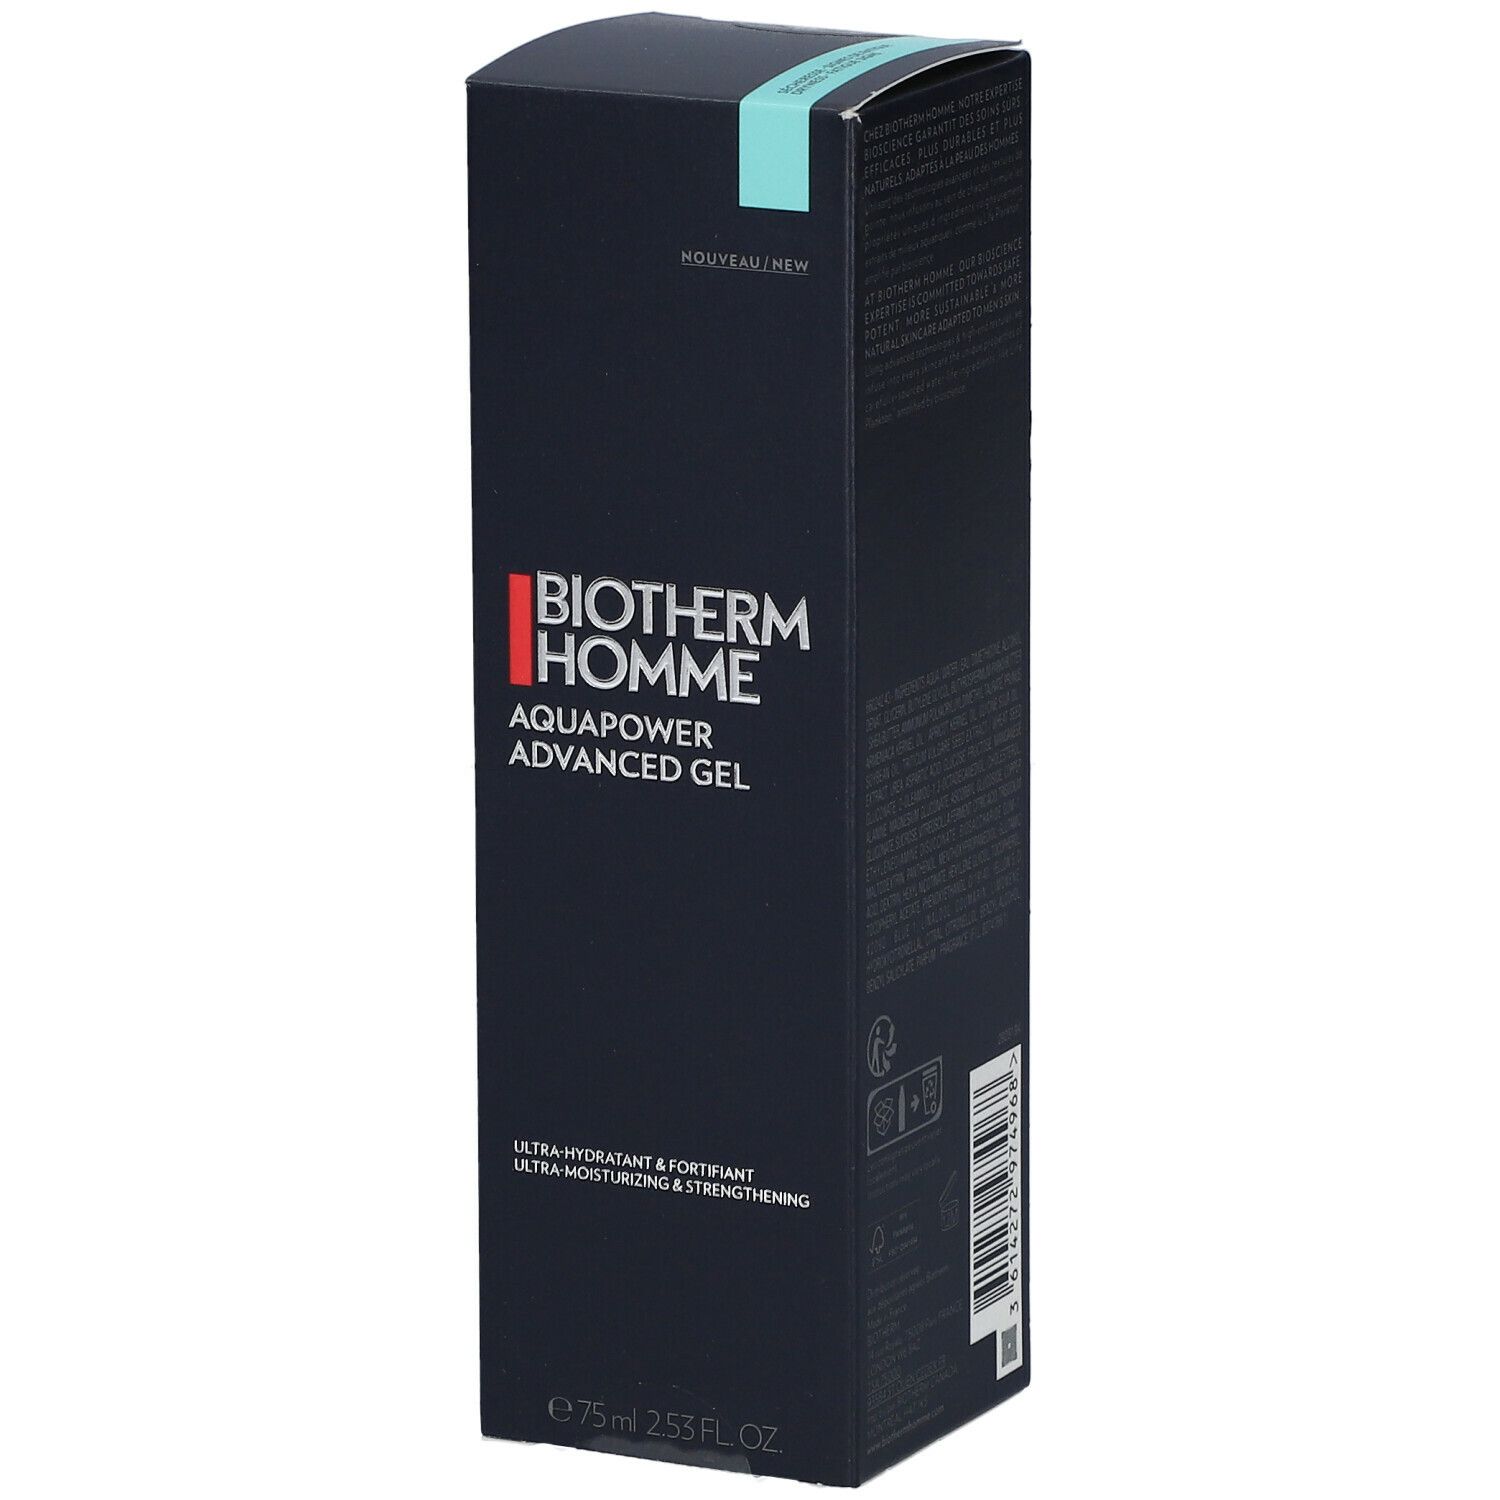 Biotherm Homme Aquapower Advanced Gel Ultra-hydratant & Fortifiant